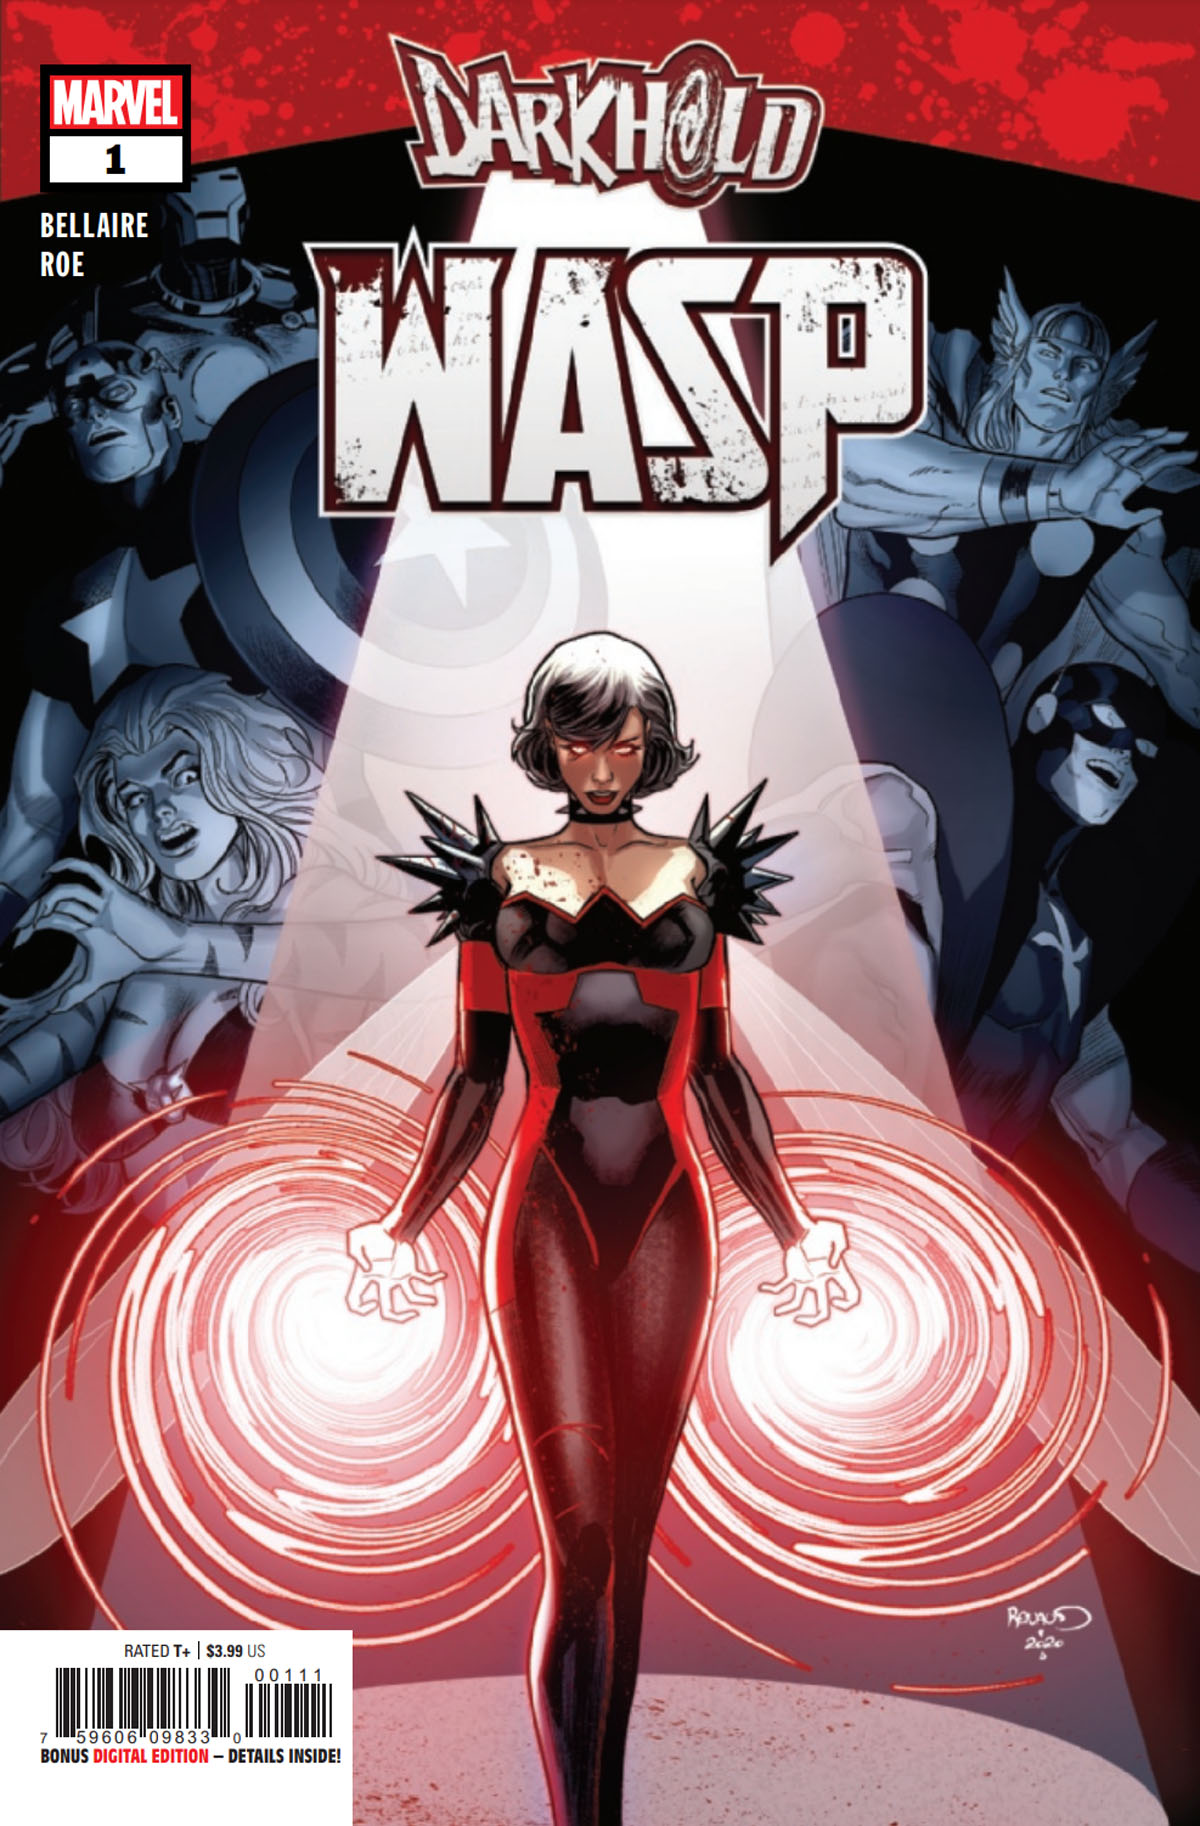 Darkhold: Wasp #1 cover